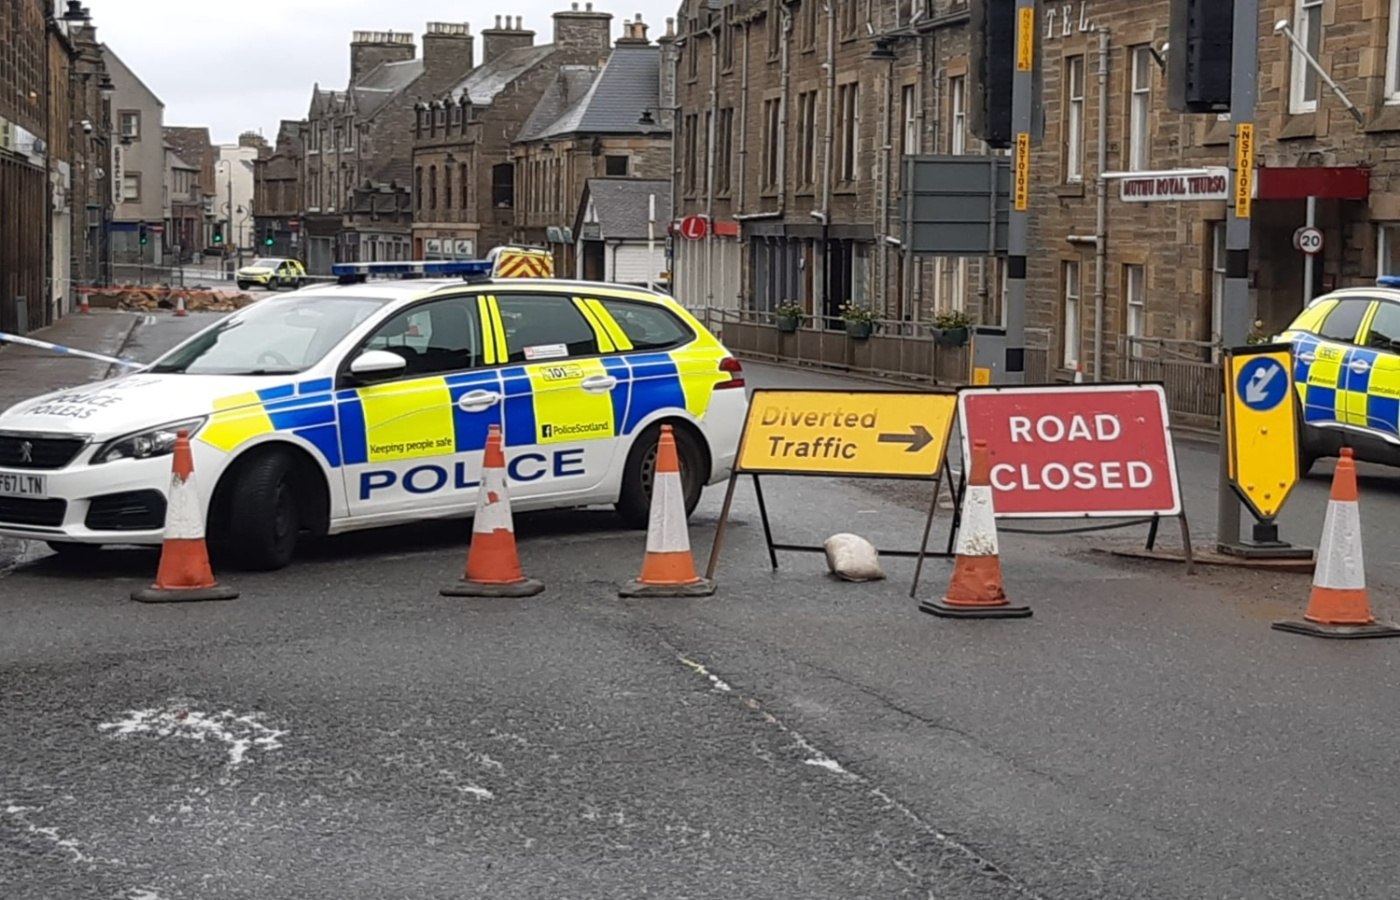 Police have closed the road and told members of the public to avoid the area.